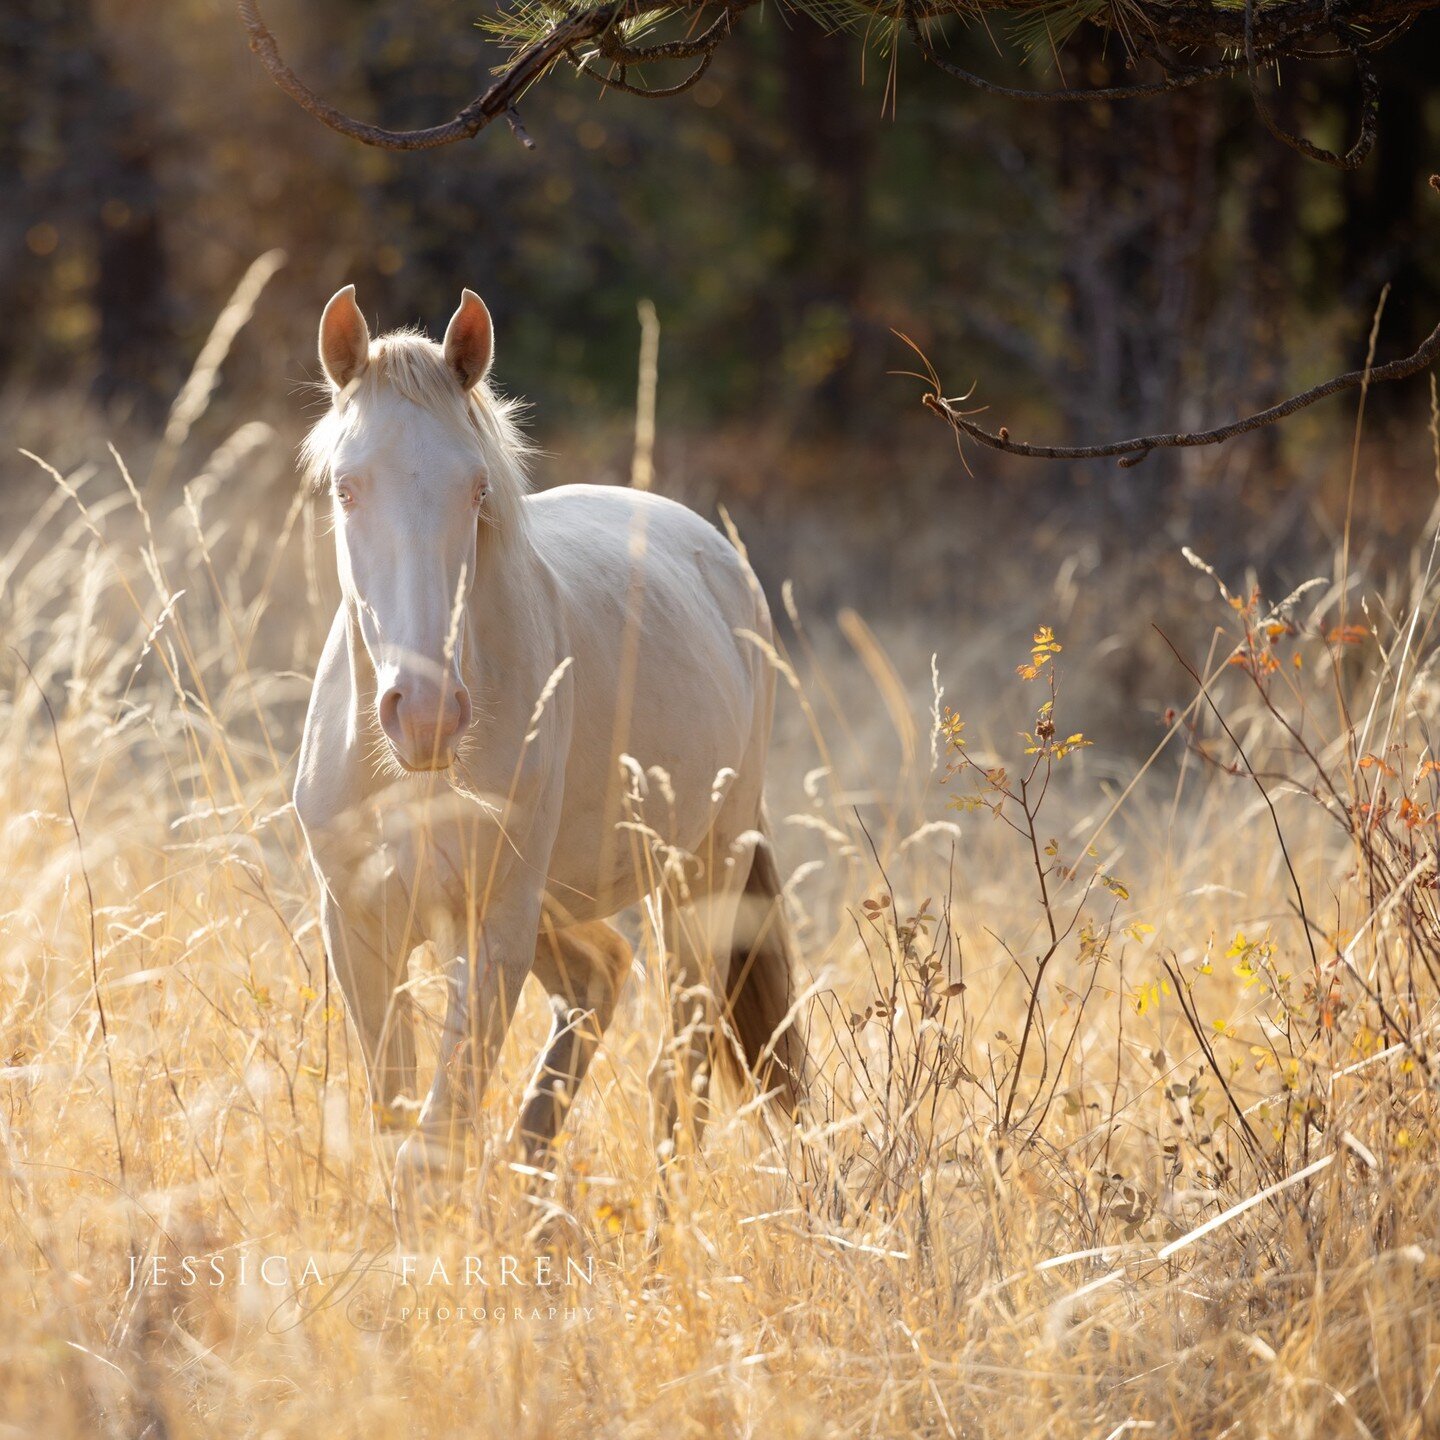 Oh my! You should have seen the adorable Lusitano filly I met during my visit to @kentonwrightequestrian's place! She was such a curious little thing, peeking out at me from the tall golden grass. I couldn't help but notice her beautiful cremello coa